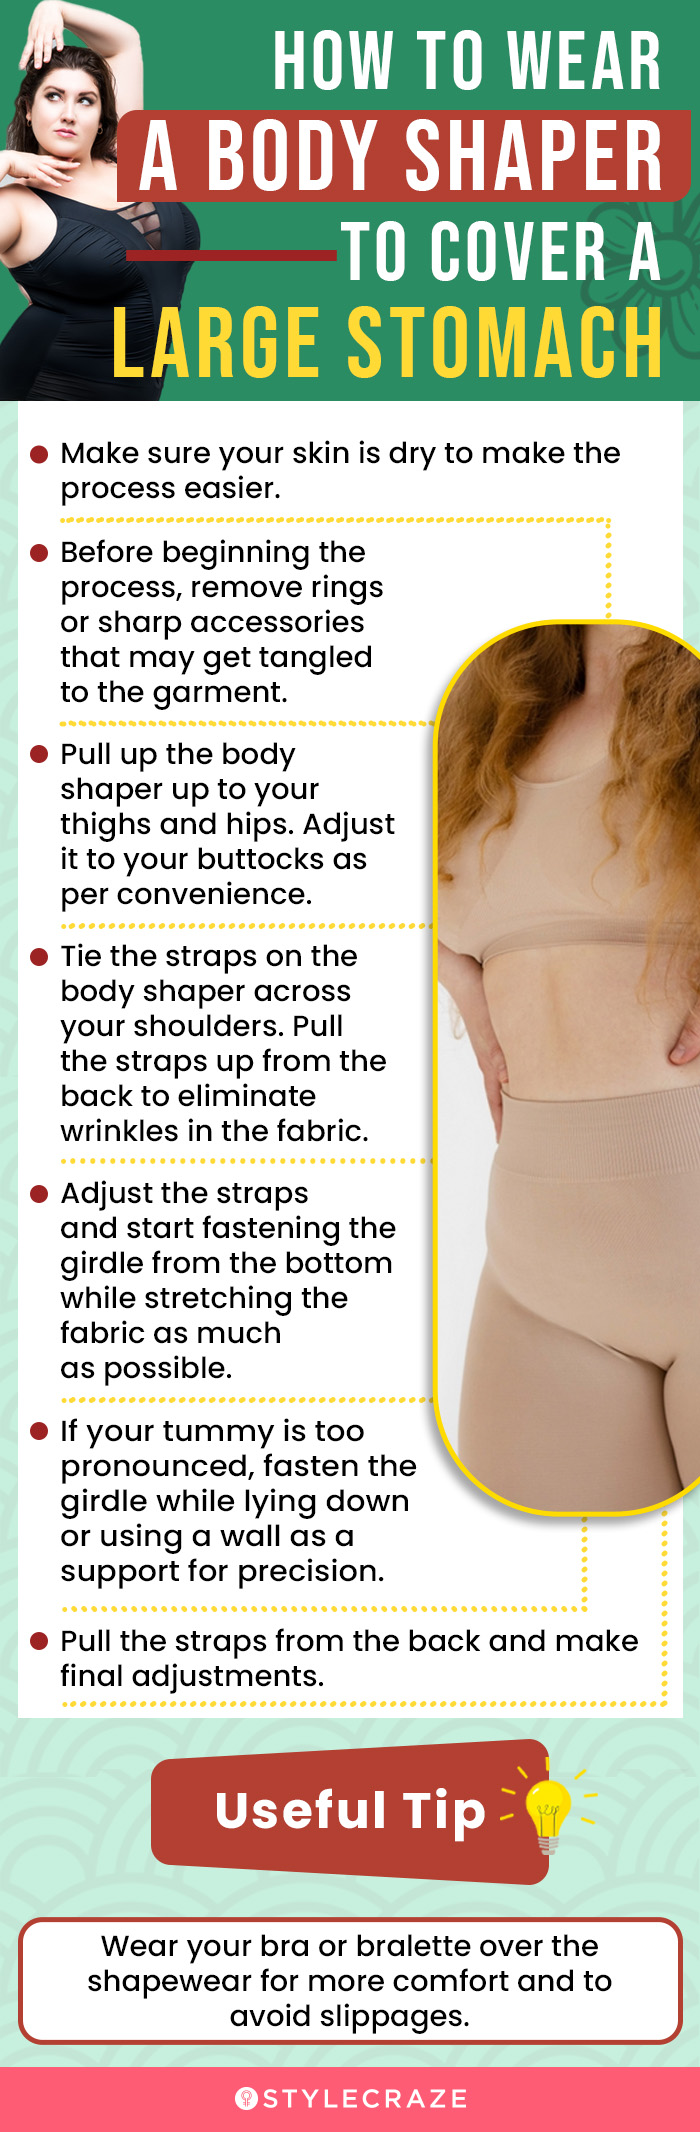 How To Wear A Body Shaper To Cover Large Stomach [infographic]